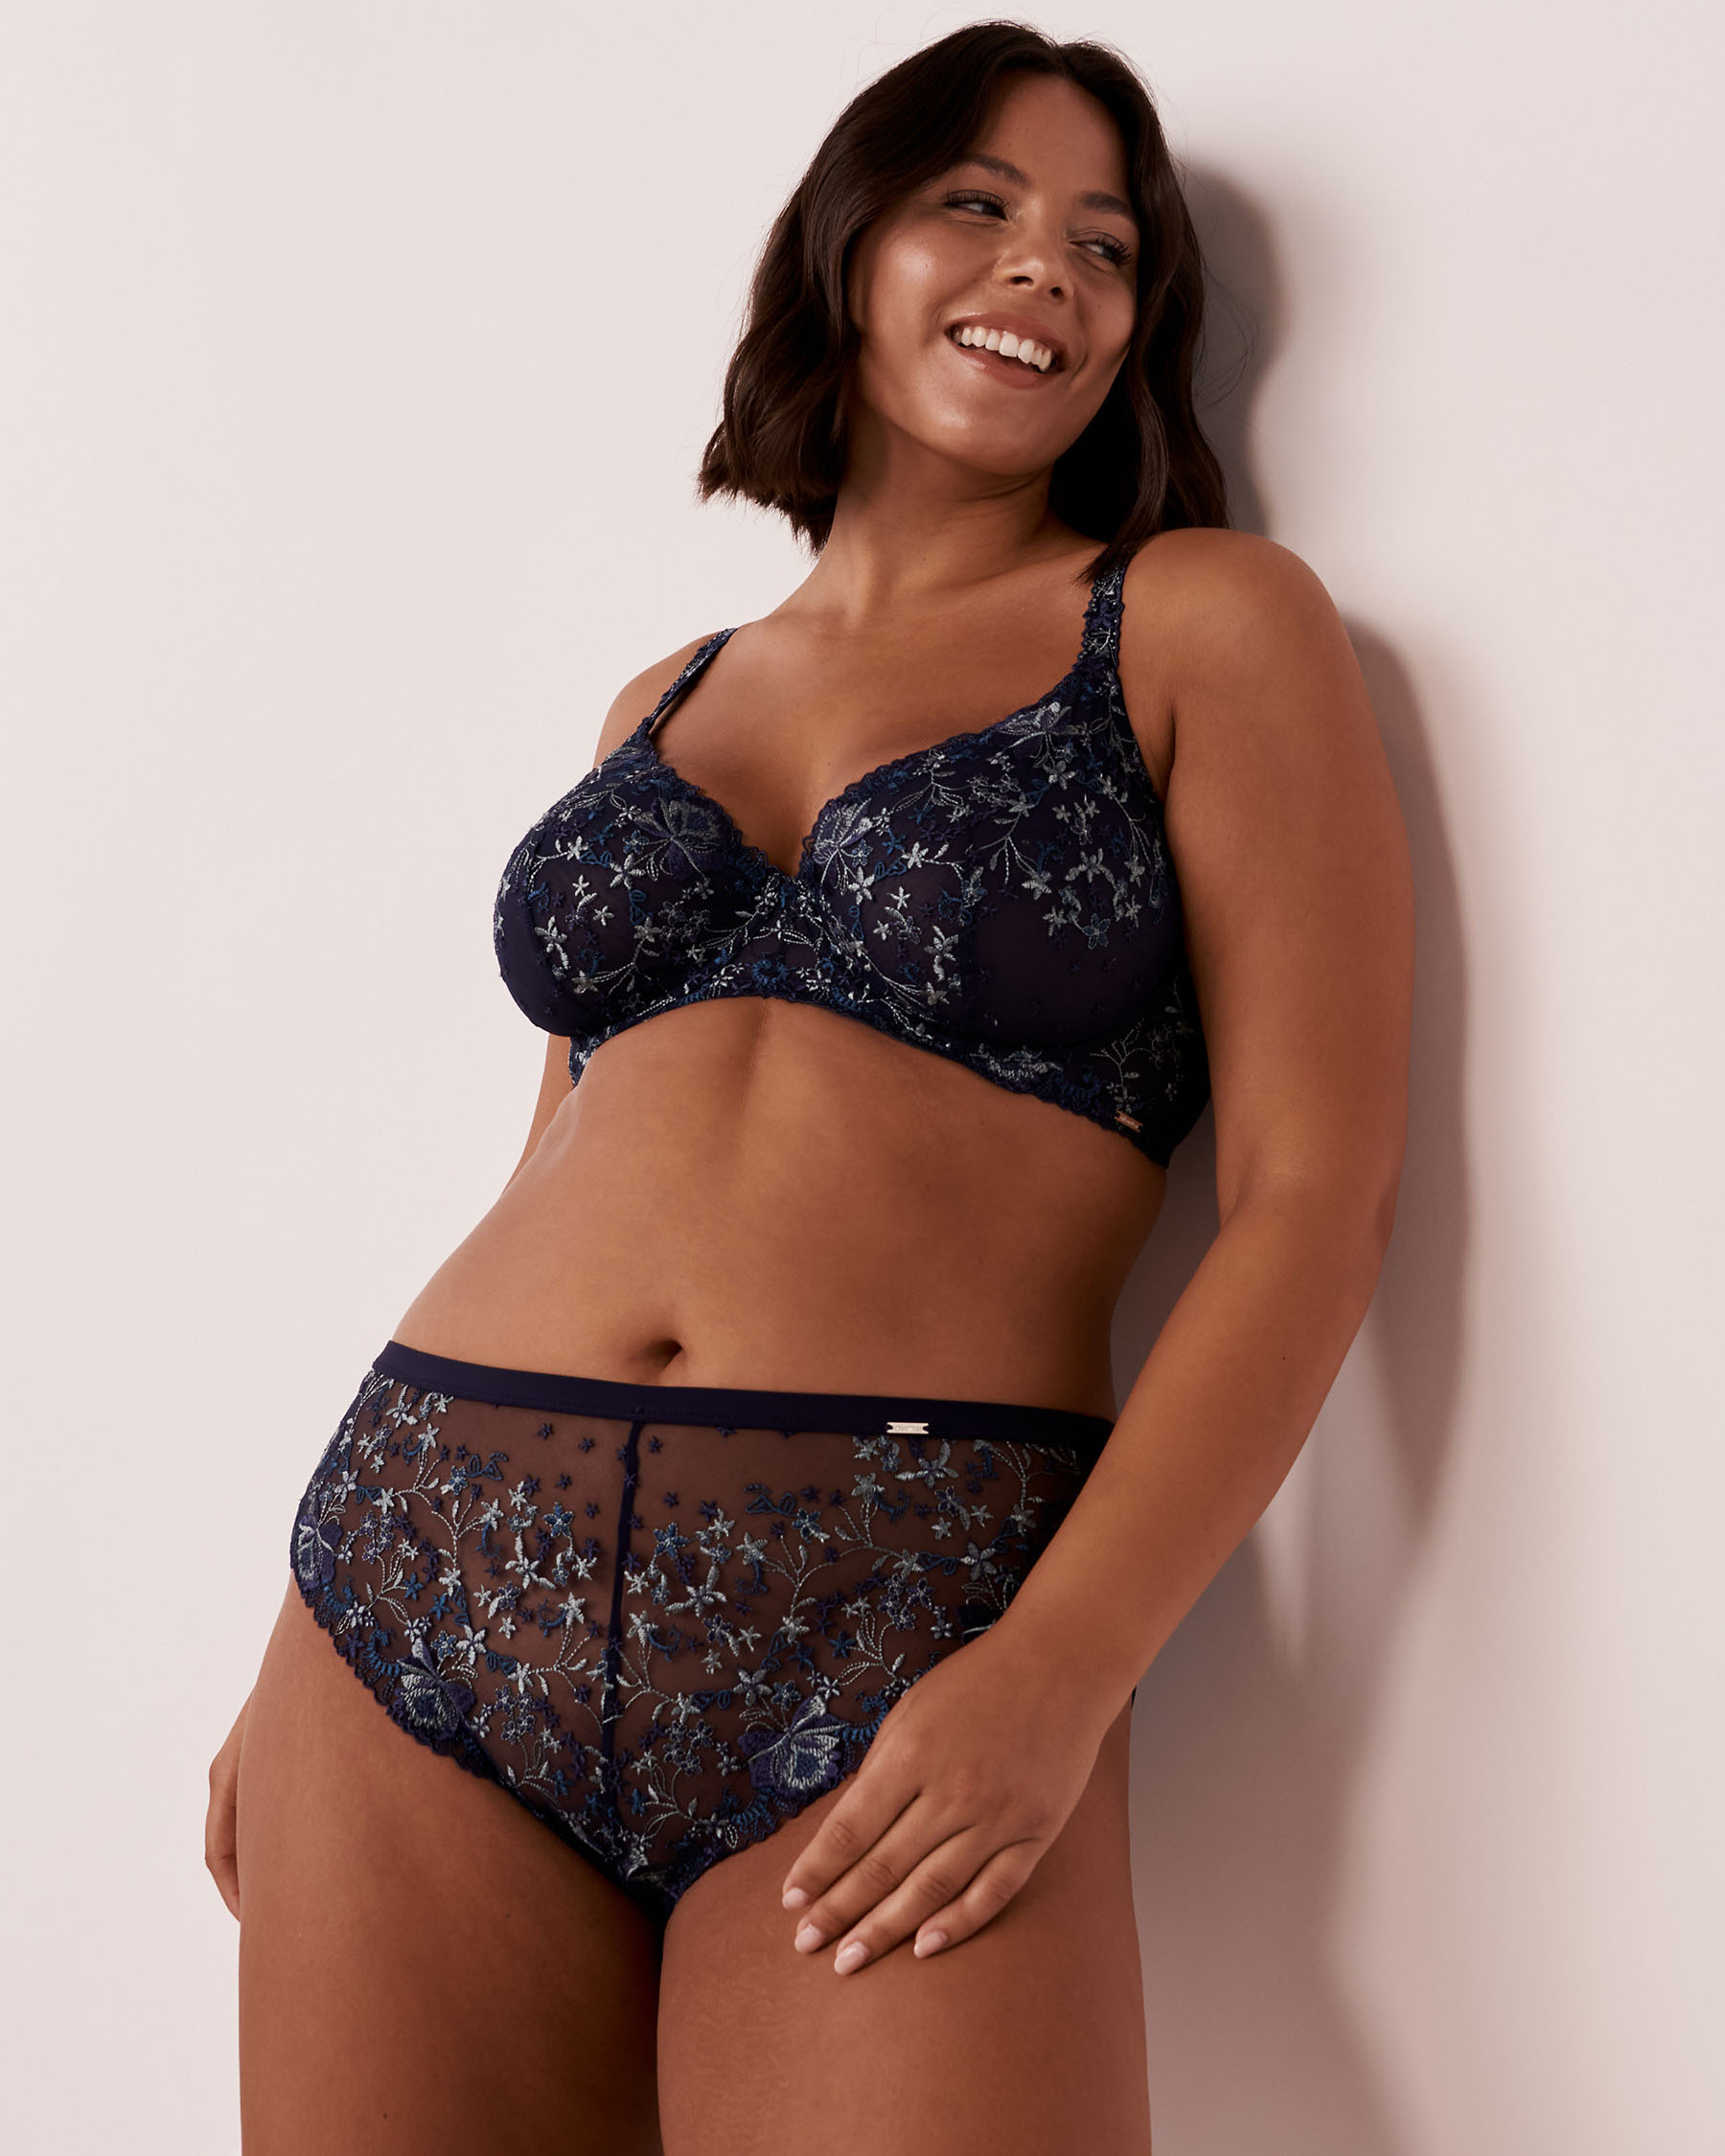 LA VIE EN ROSE Embroidered Mesh Cheeky Panty Romantic navy floral 20300143 - View7